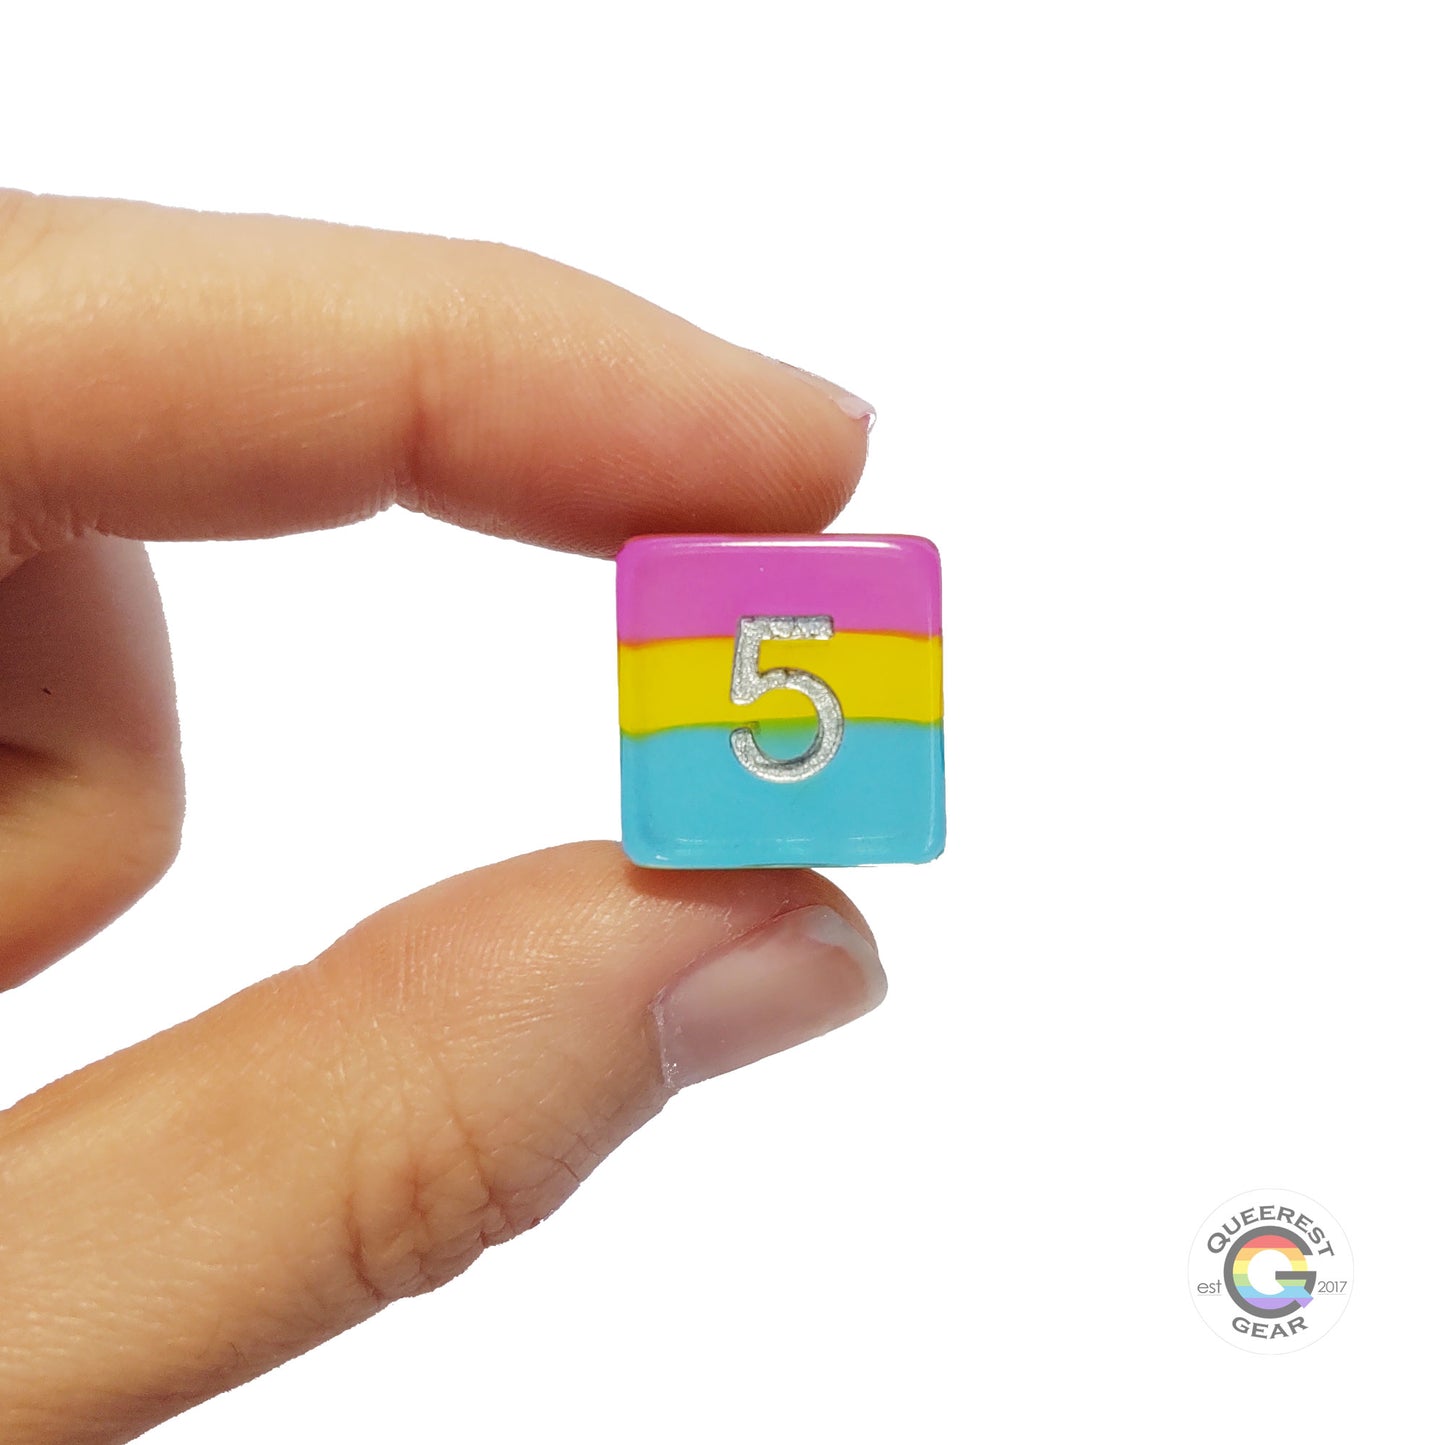 A hand holding up the pansexual d6 to show off the color and transparency